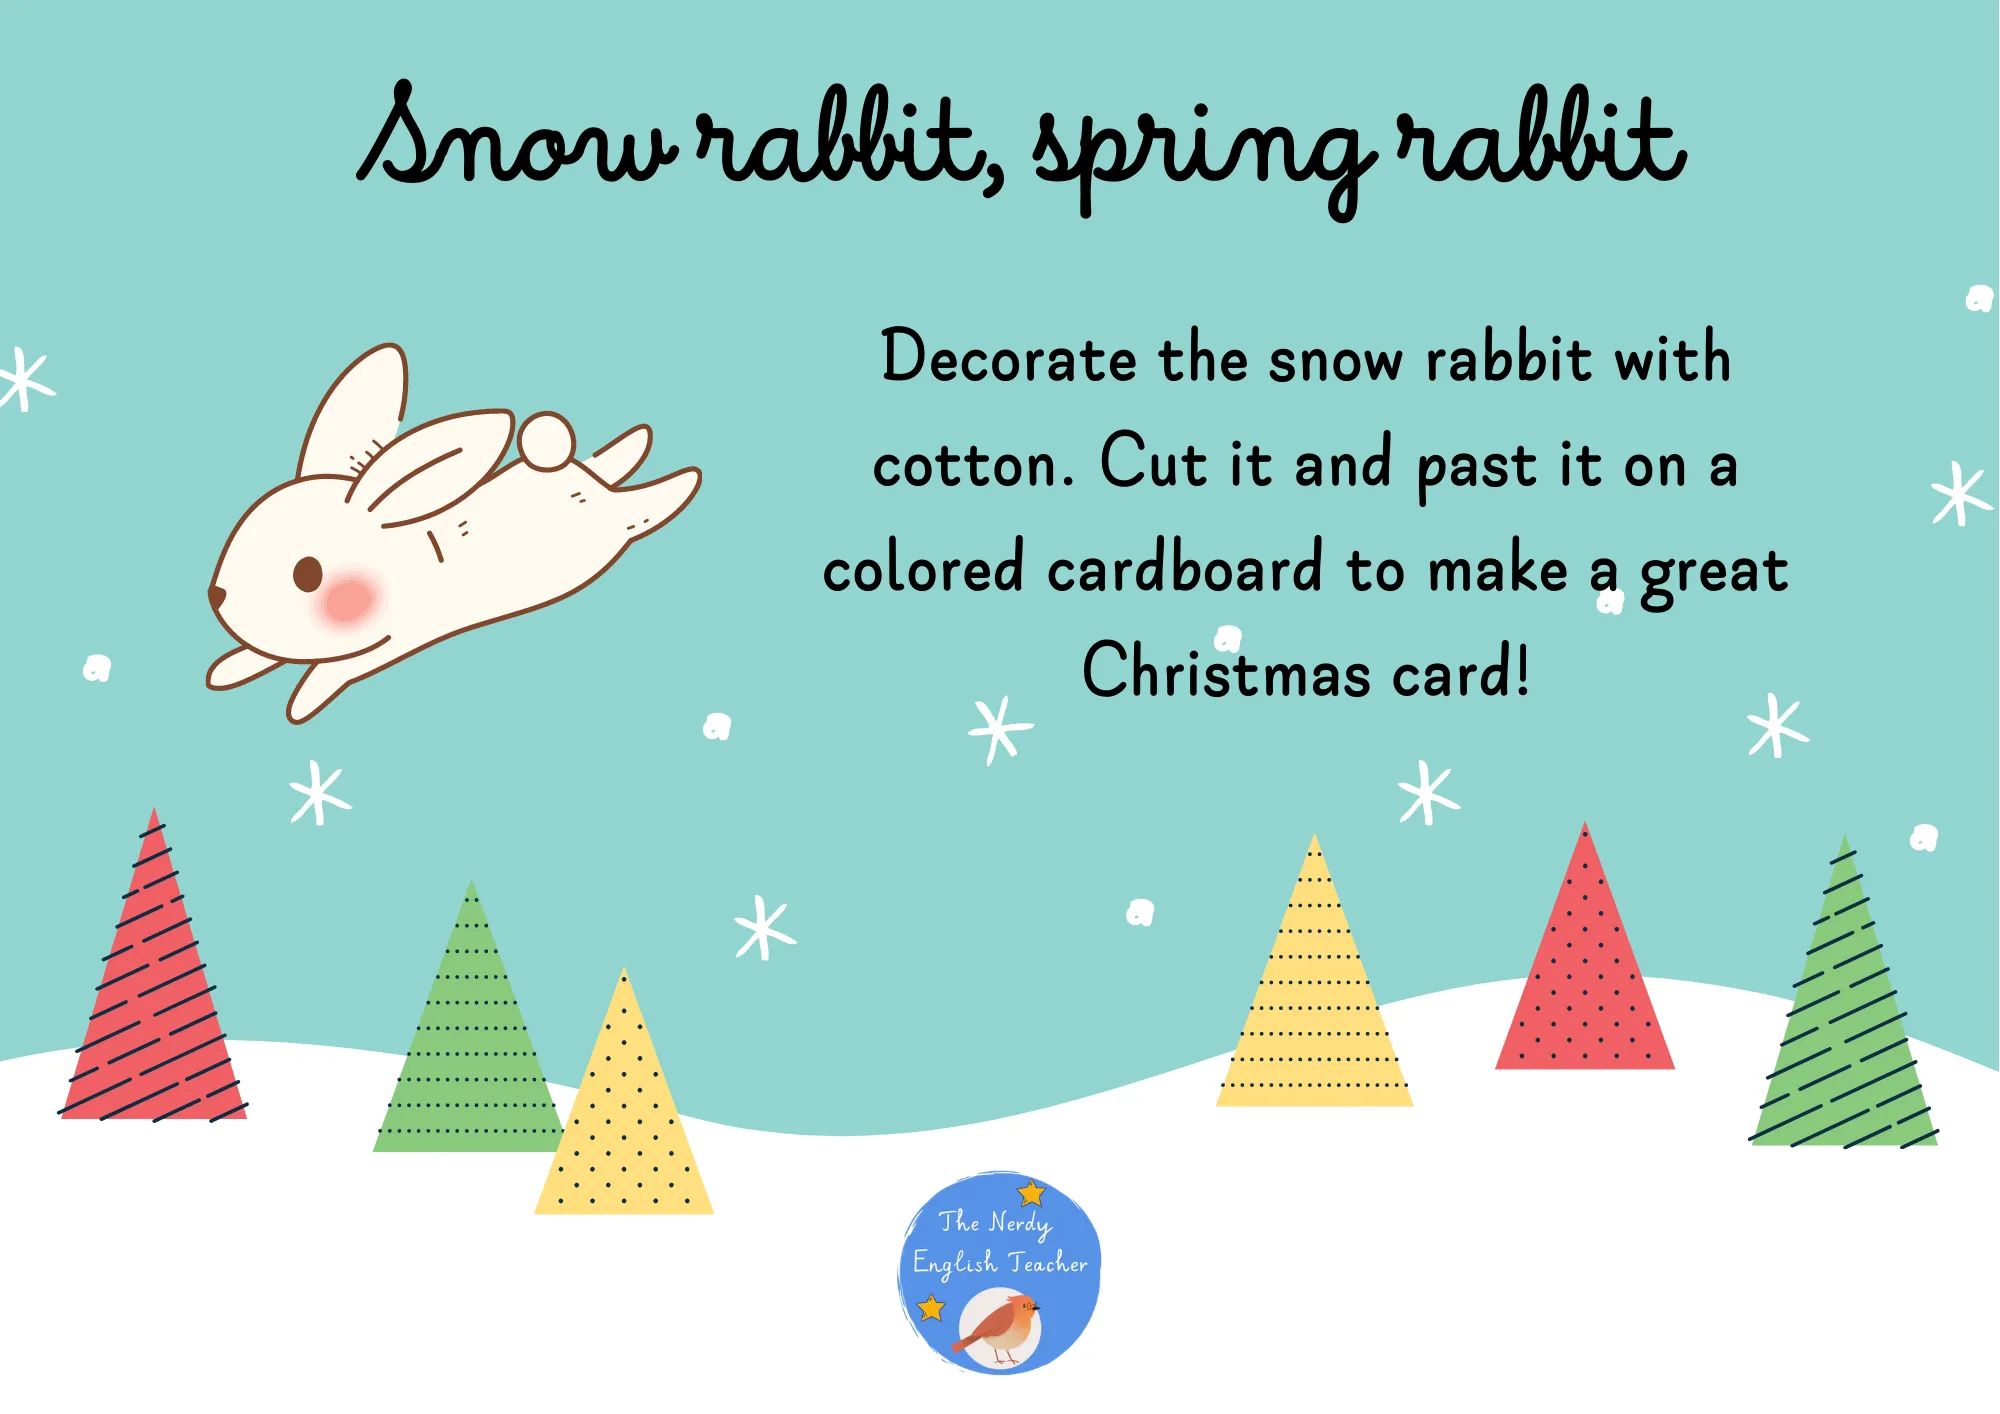 Christmas card: "Snow rabbit, spring rabbit" by Il Sung Na